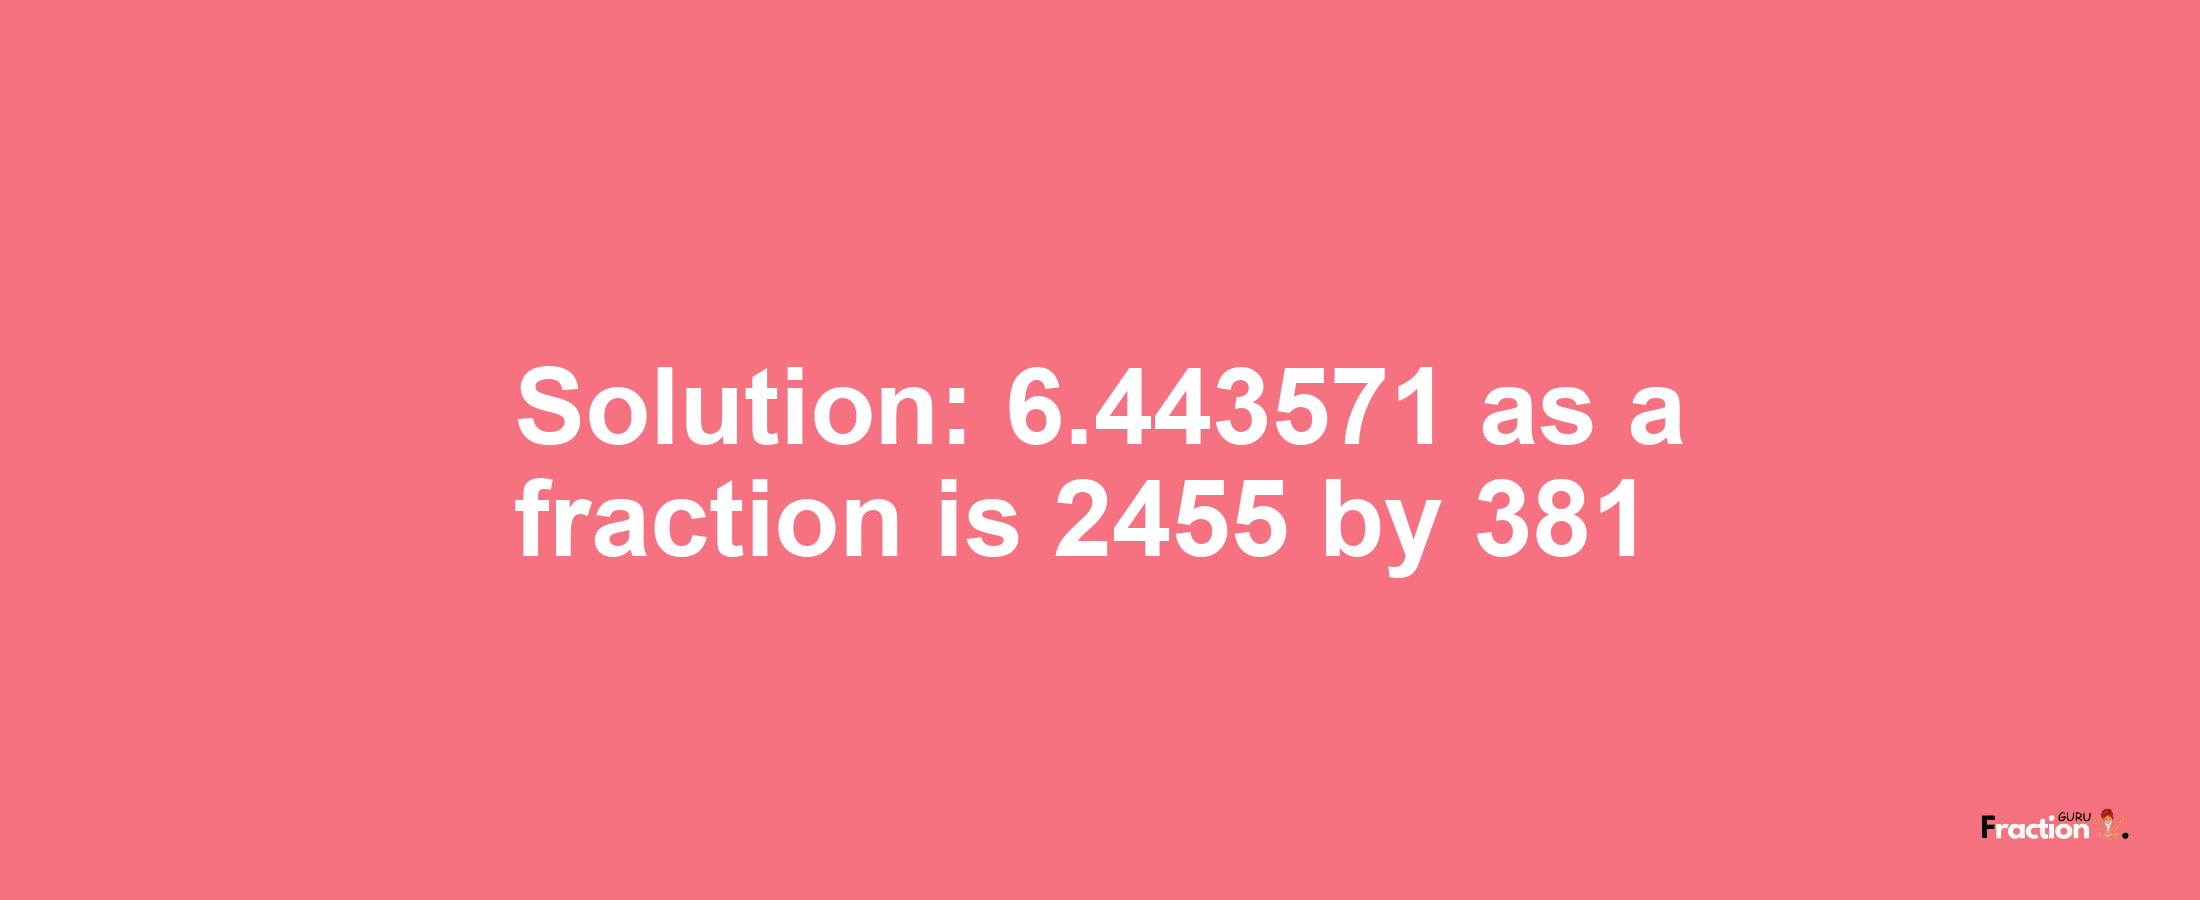 Solution:6.443571 as a fraction is 2455/381